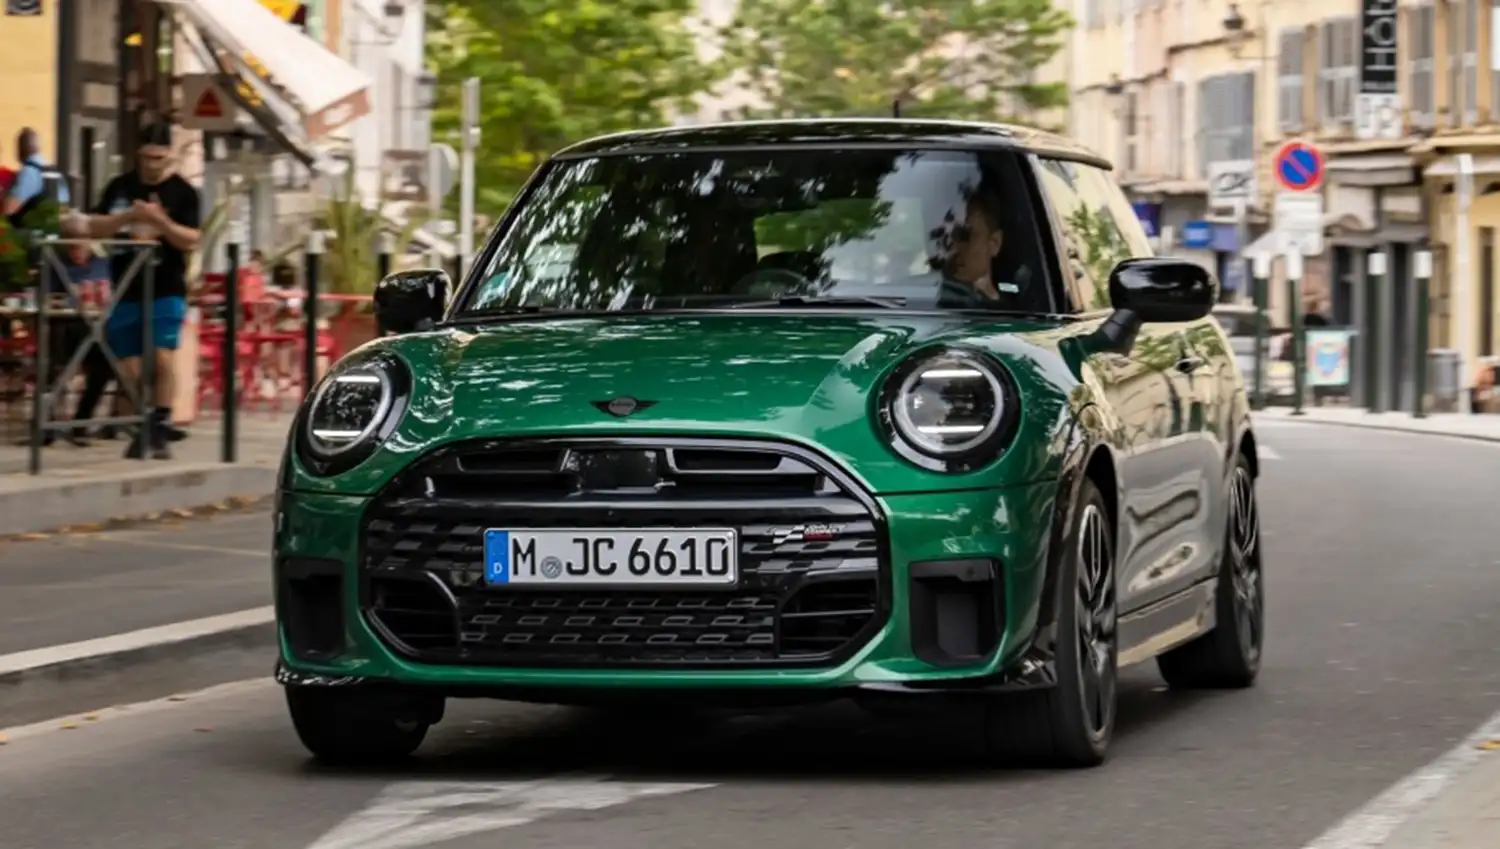 MINI Cooper S in JCW Trim: Sporty Design with Brand-Typical Performance